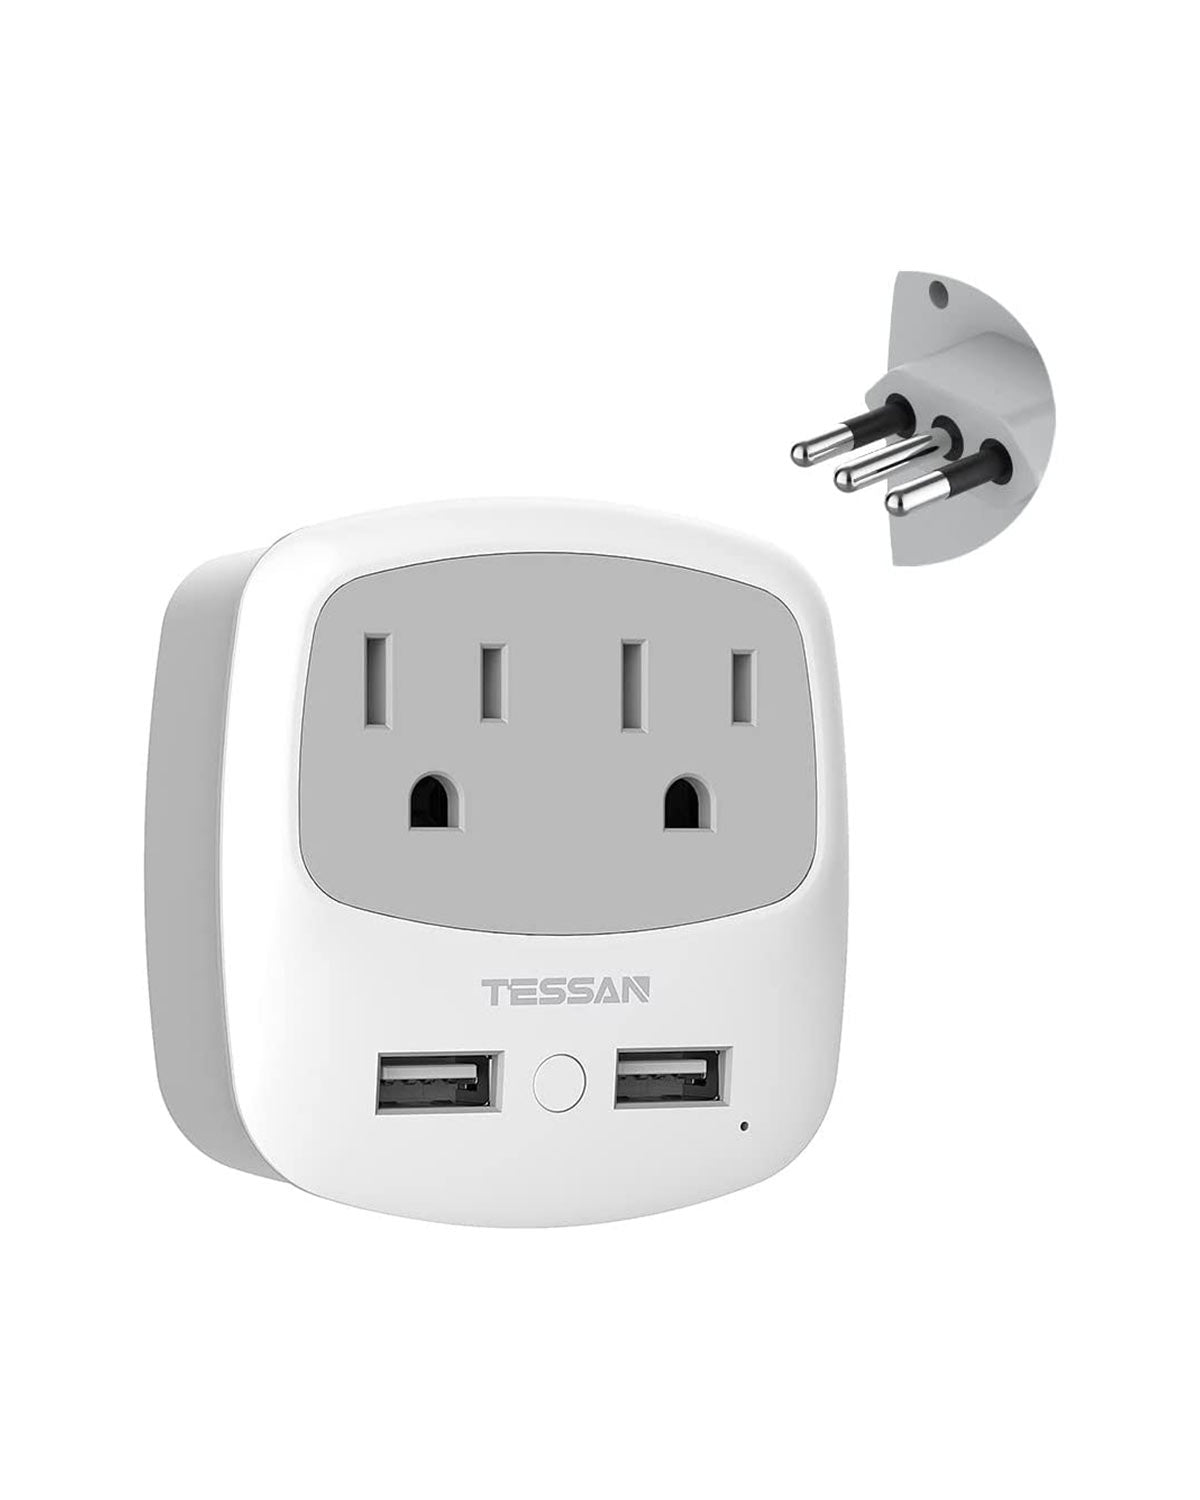 TESSAN Italy Travel Plug Adapter with 2 USB Charger Ports 2 American Outlets